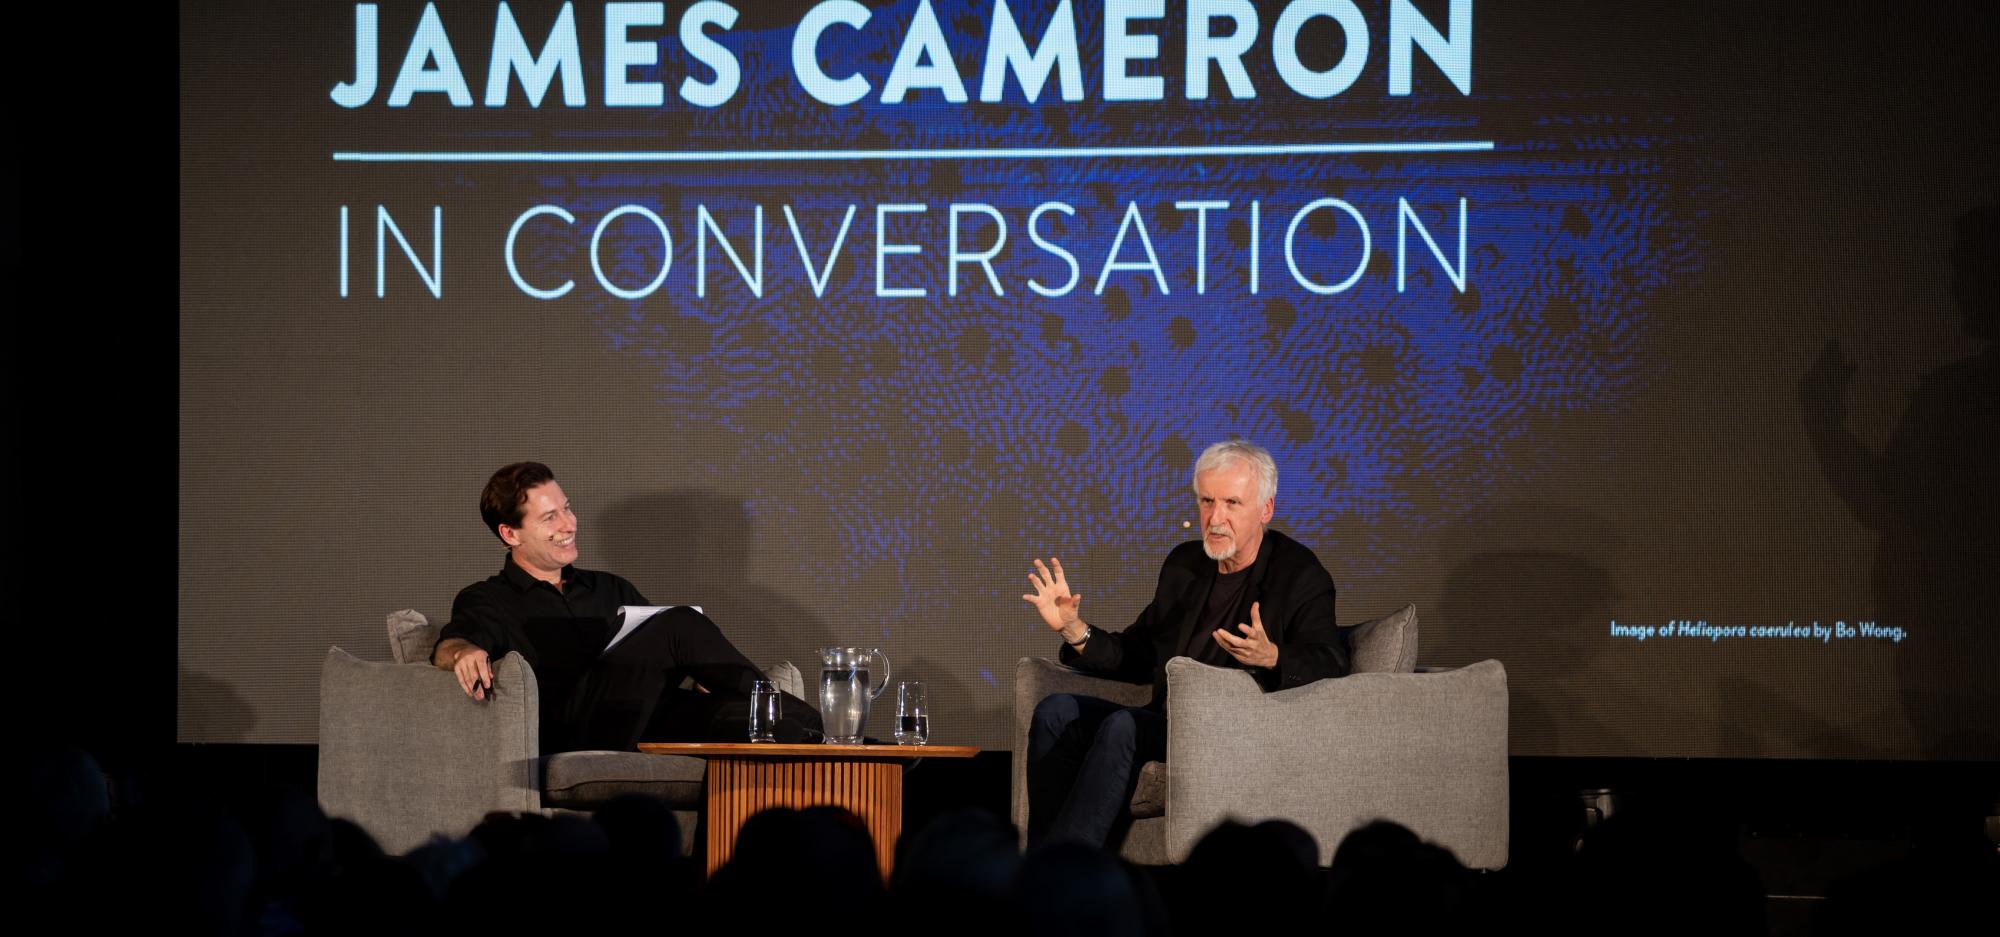 James Cameron dressed in black with grey hair sits in a grey chair and gestures passionately as he speaks at a large crowd. The words James Cameron In Conversation are projected behind him and Ben Shea, also dressed in black with dark hair reclines with a smile on his face in a grey chair opposite.